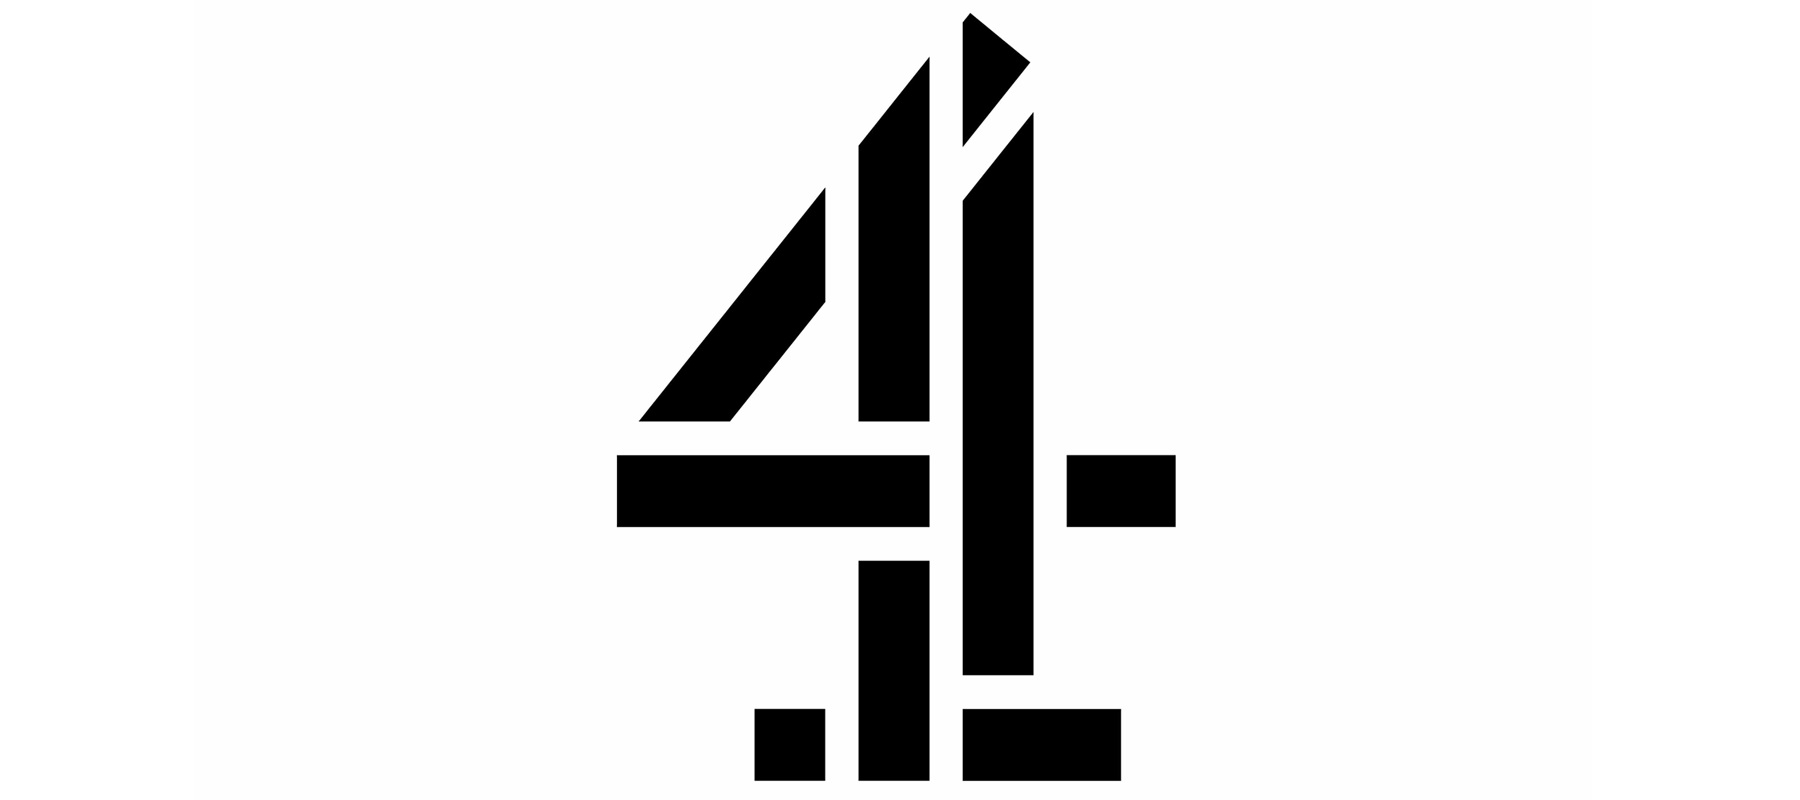 Channel 4 launches strategy to become digital-first public service streamer by 2030